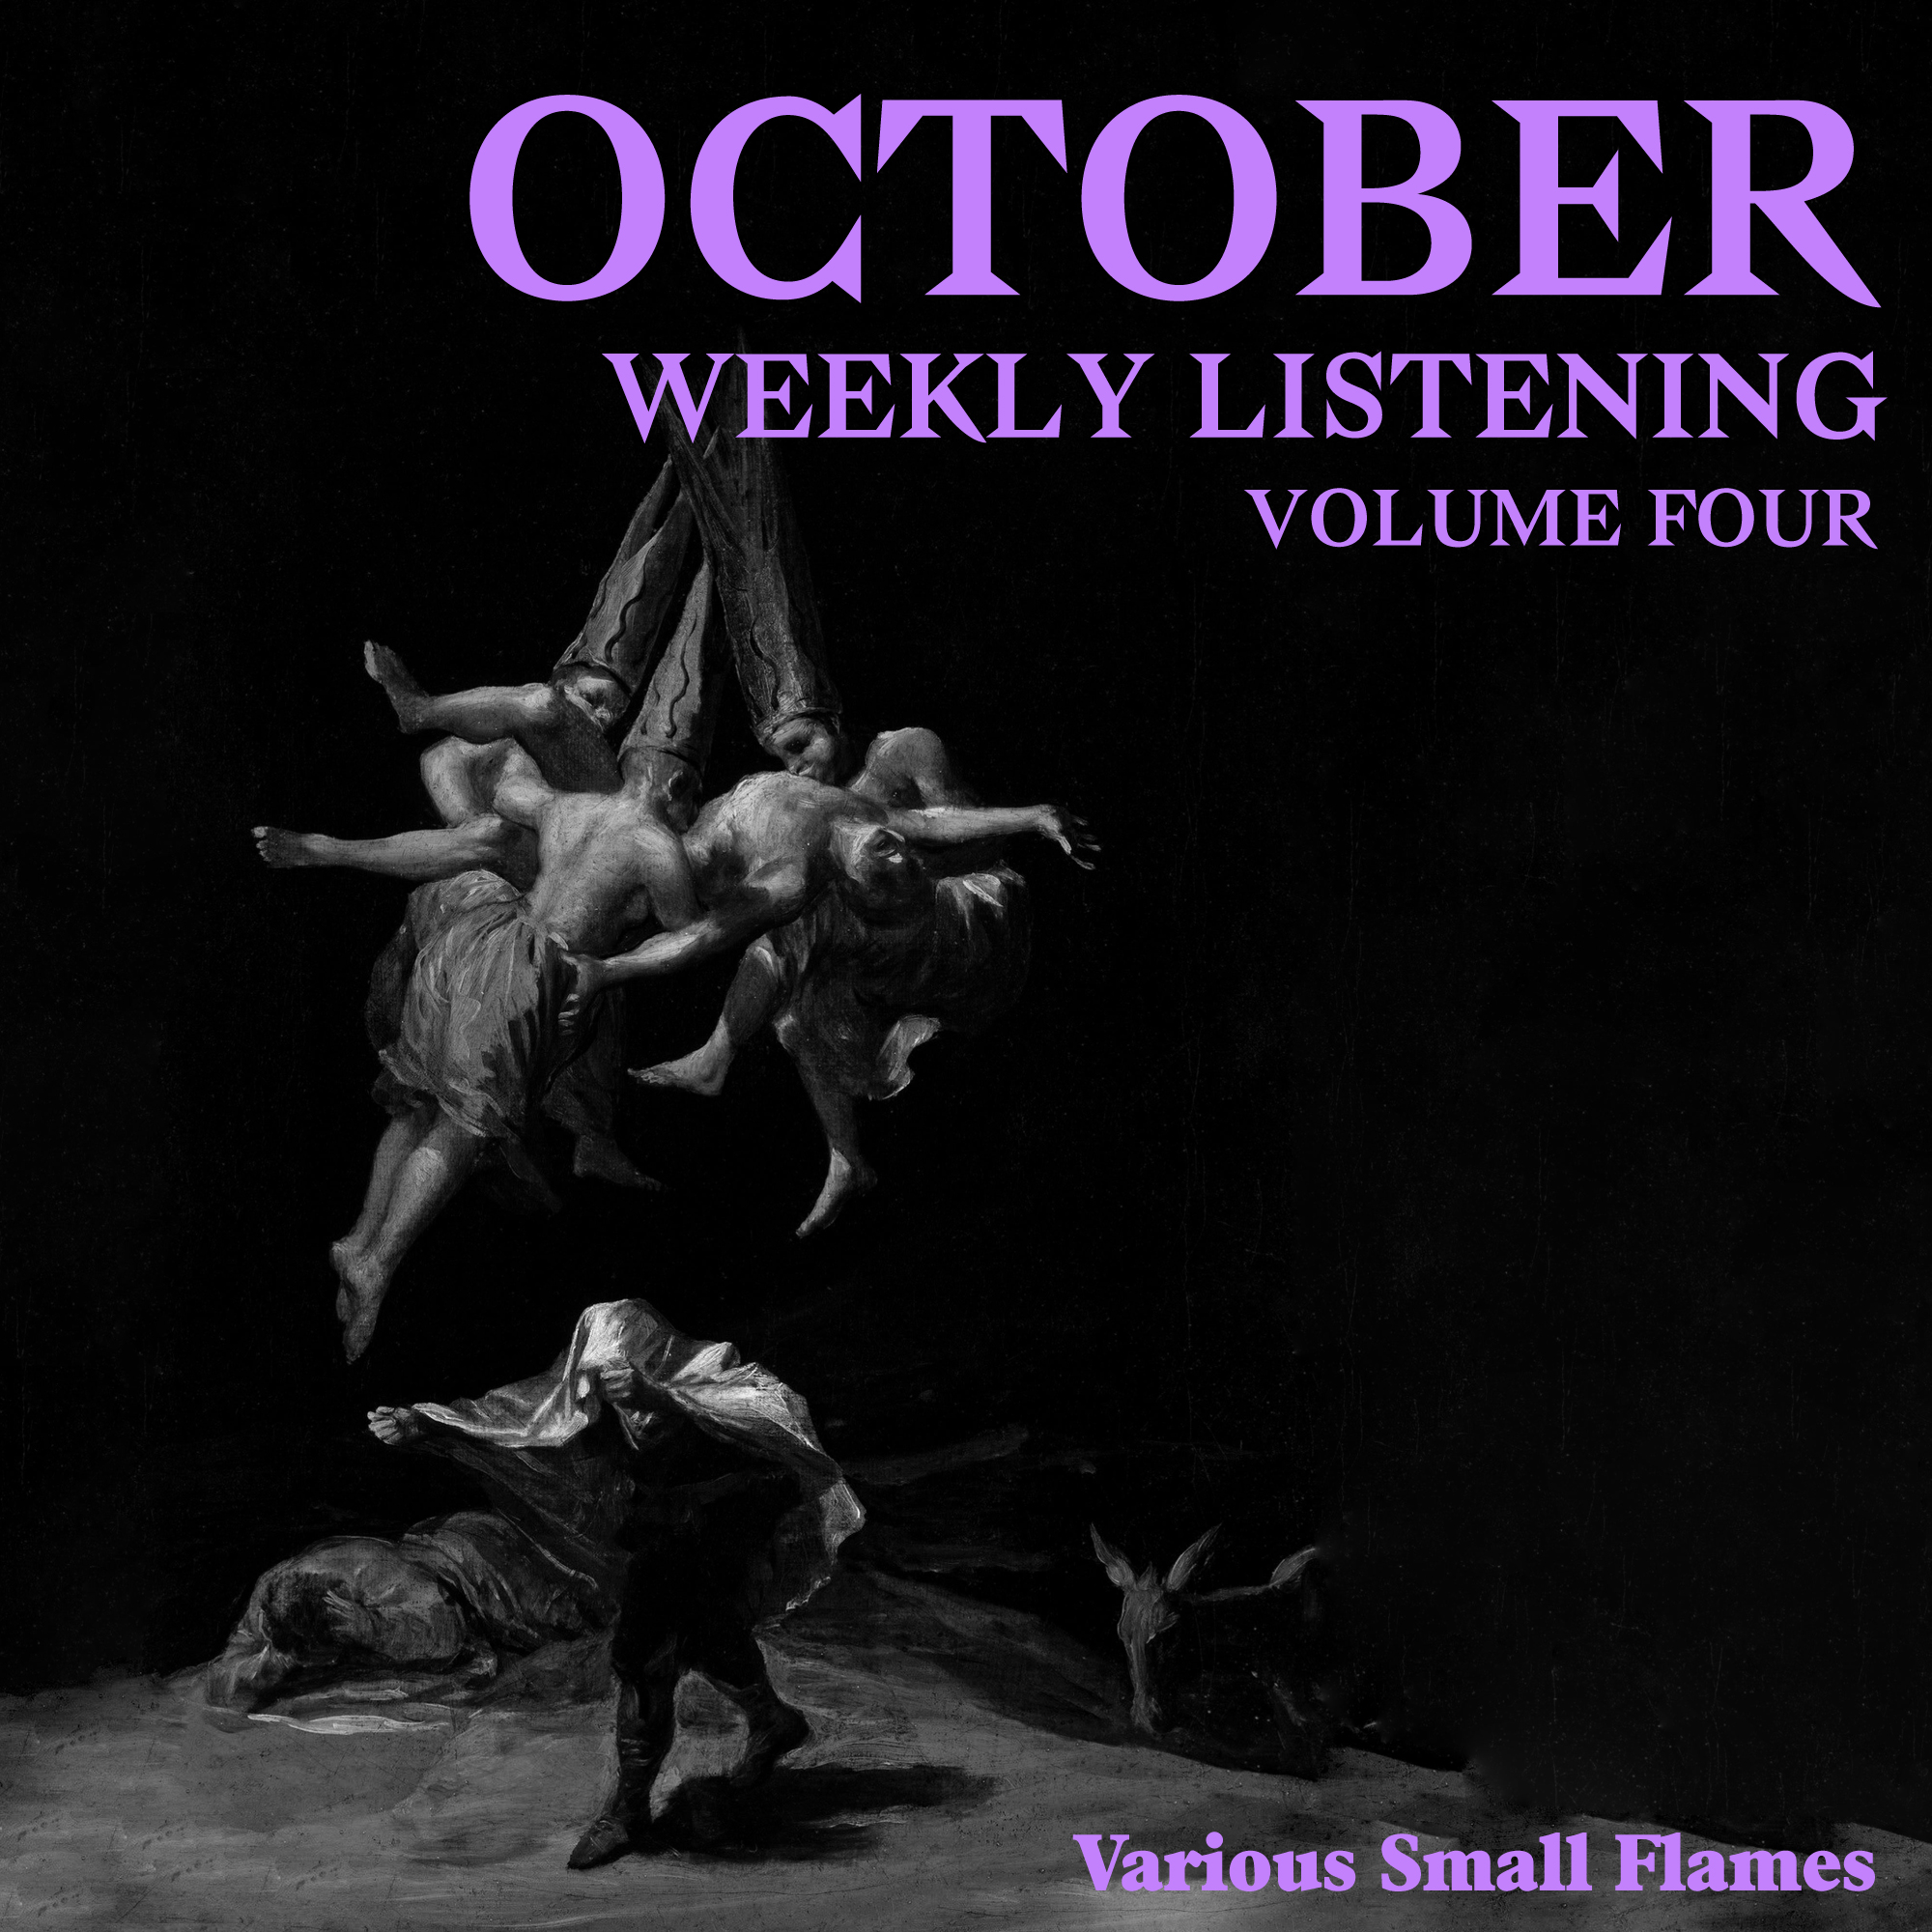 Artwork for Various Small Flames' October 2022 Weekly Listening featuring a painting of witches by Goya